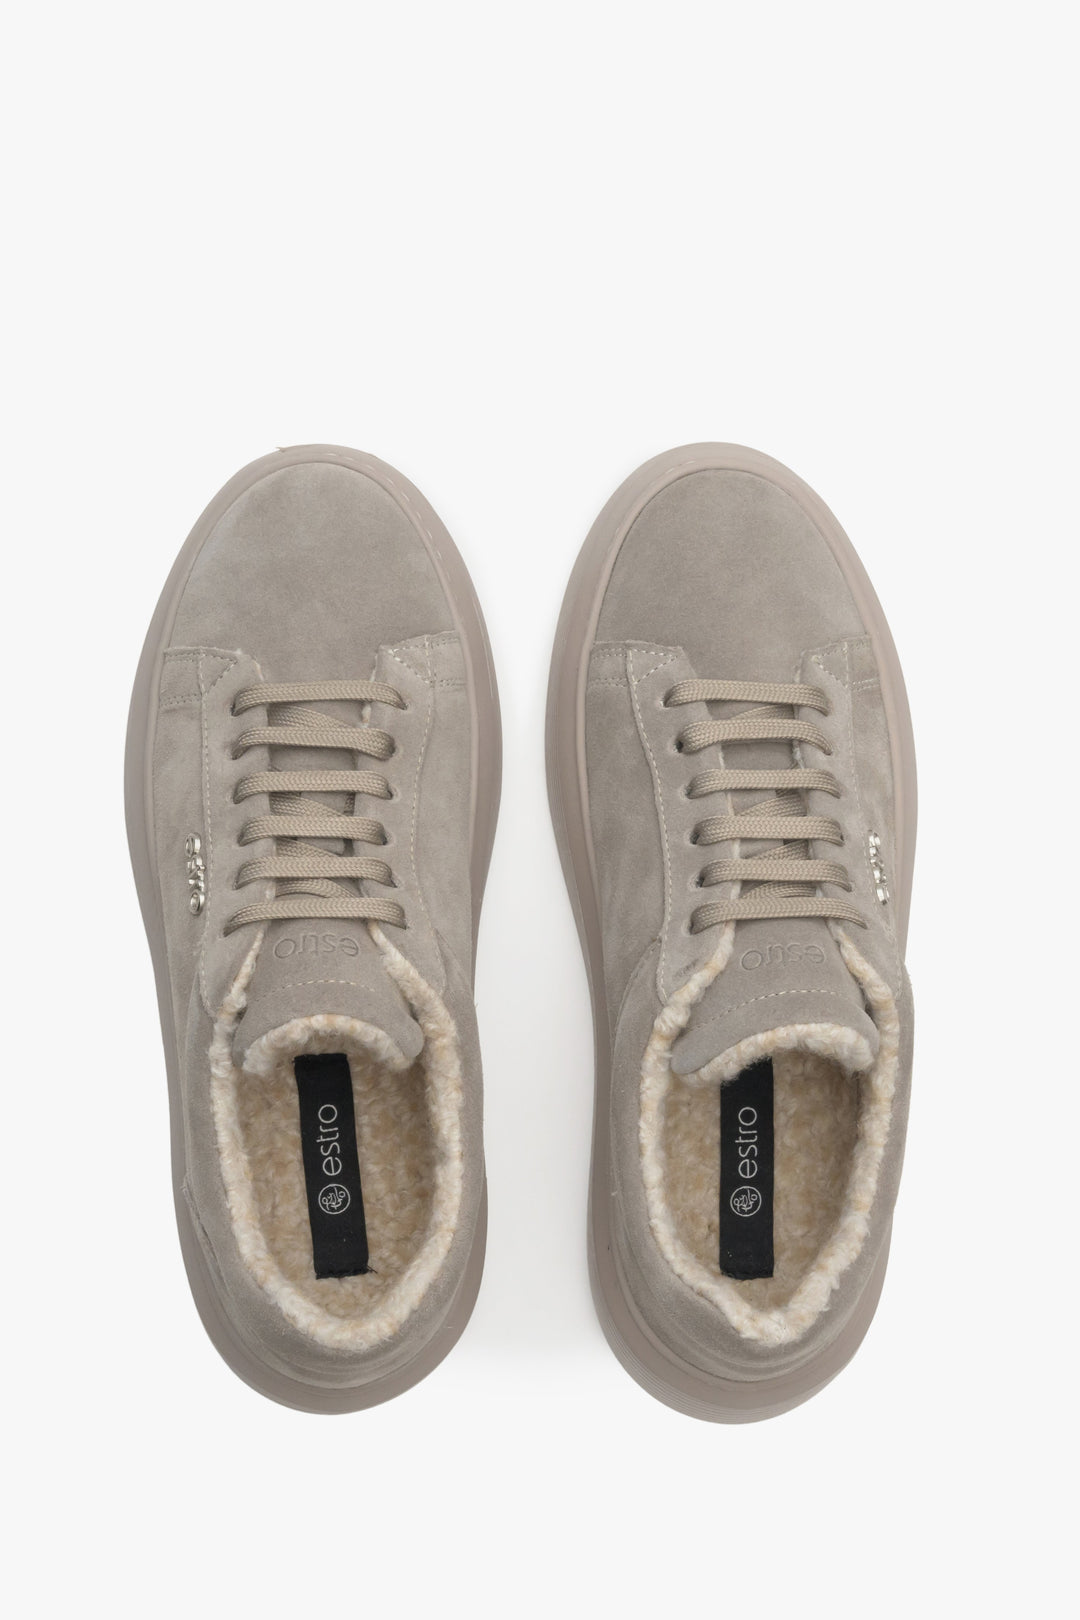 Women's low-top grey suede sneakers with natural fur for winter.